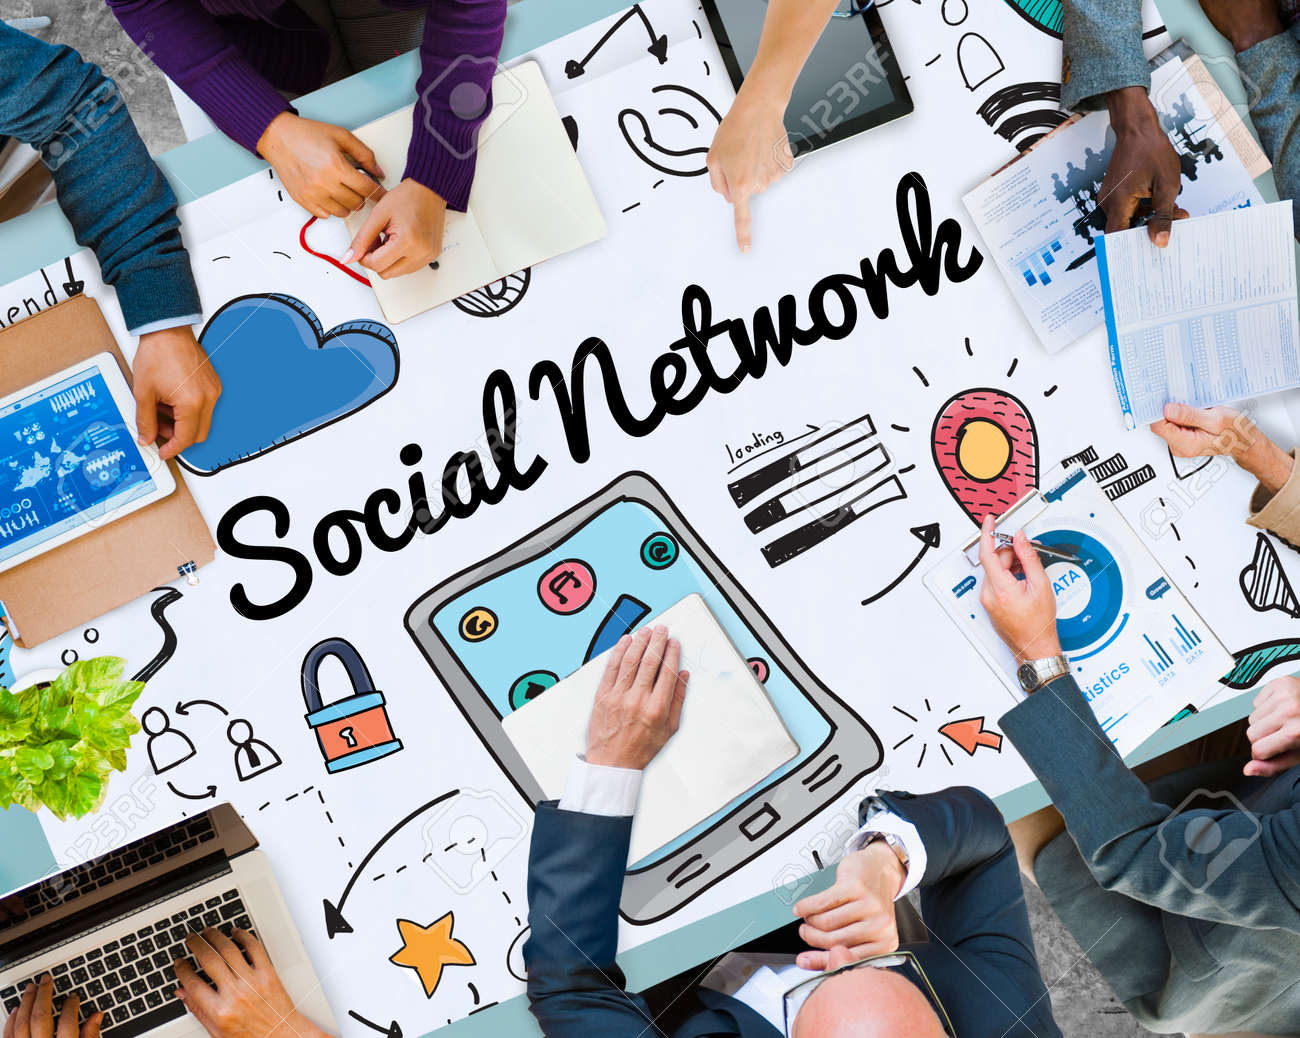 What is Social Networking and How Does it Work?